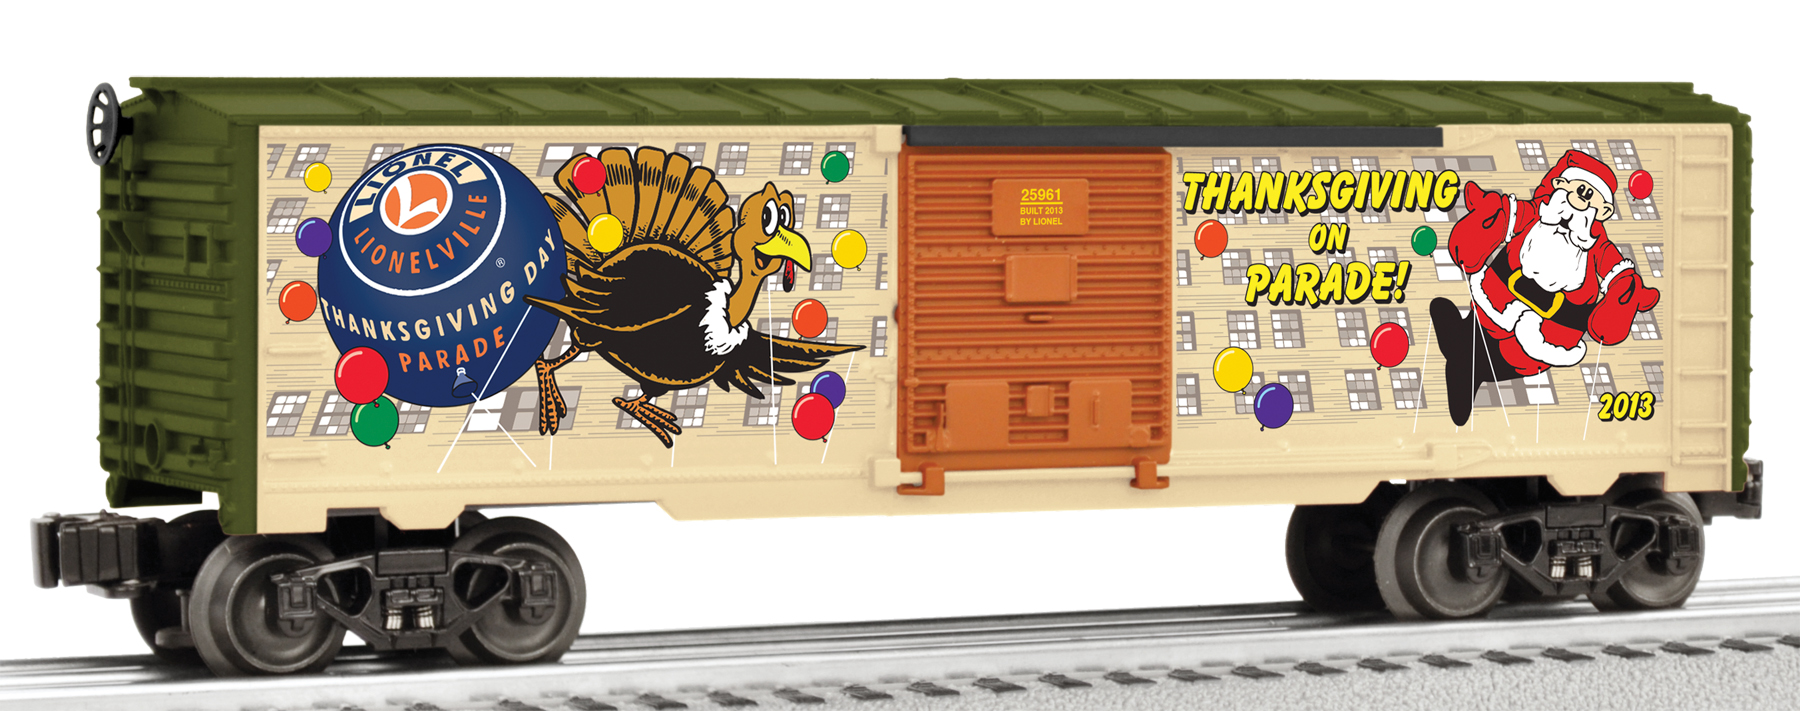 Thanksgiving on Parade Boxcar image